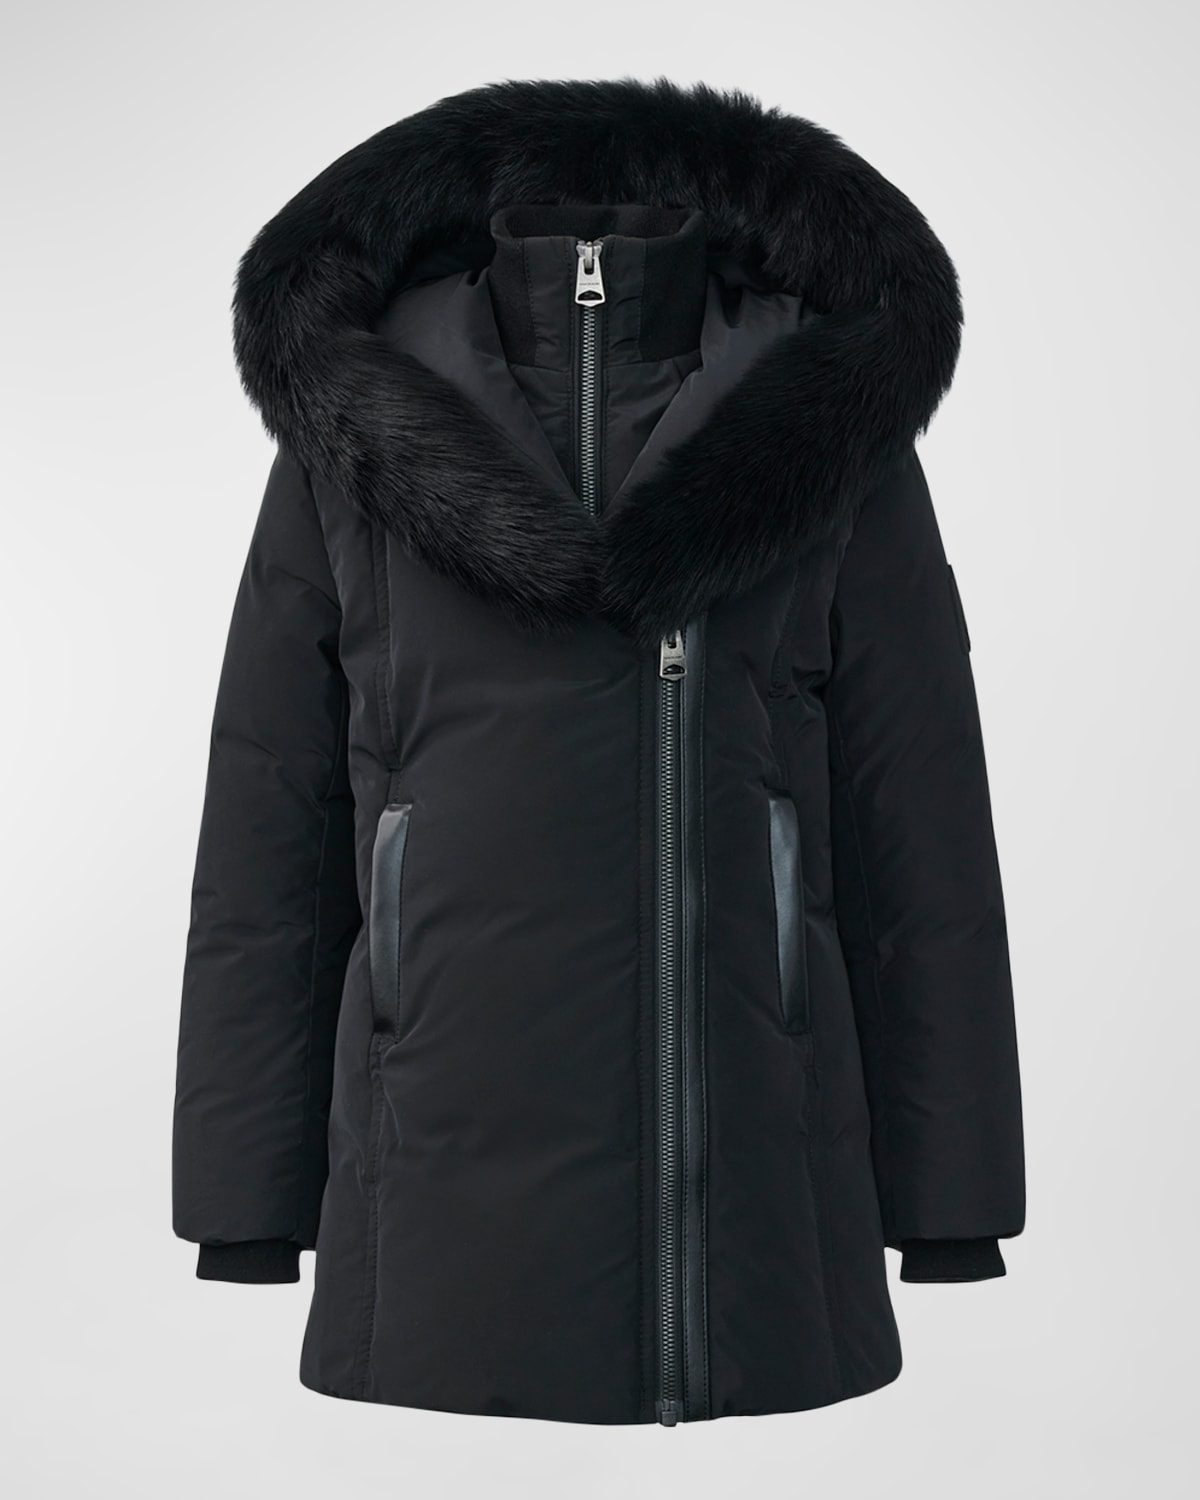 MACKAGE GIRL'S RECYCLED DOWN COAT W/ SIGNATURE MACKAGE COLLAR